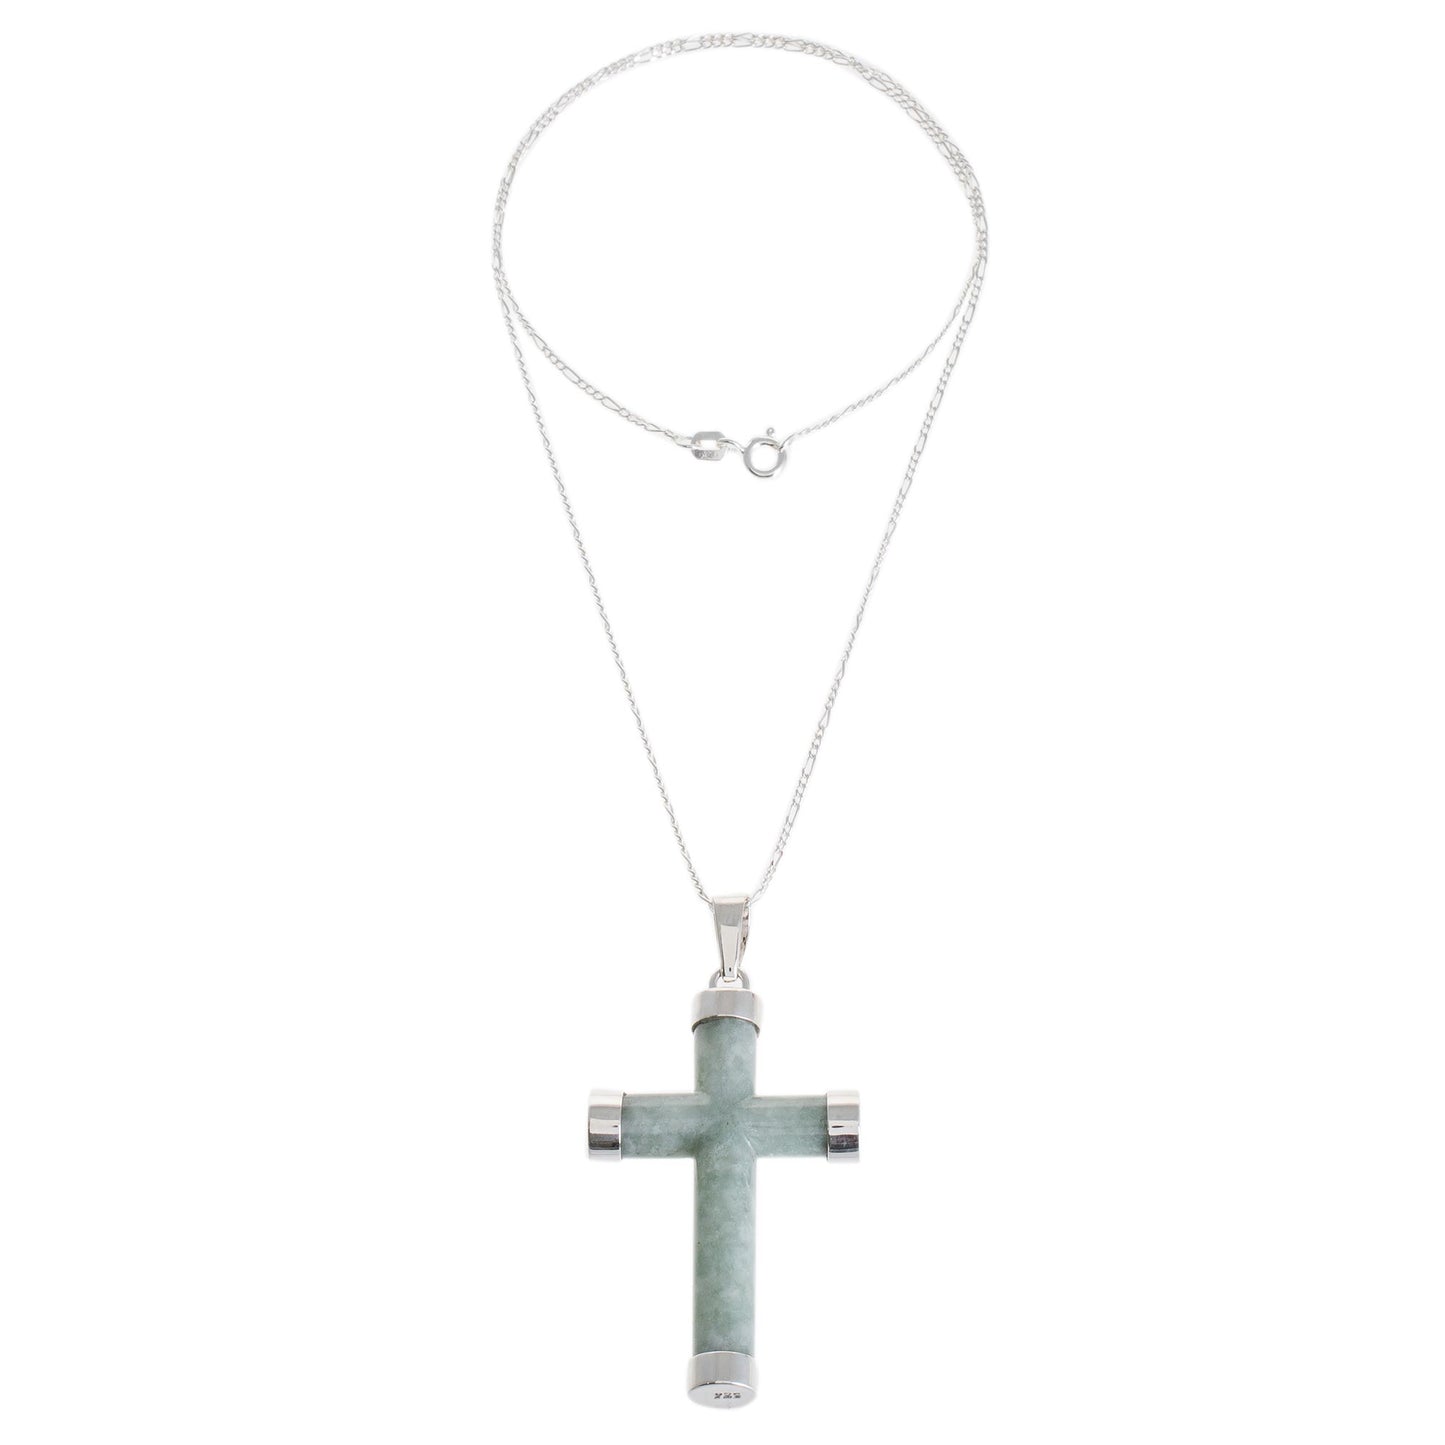 Mayan Cross Sterling Silver Necklace